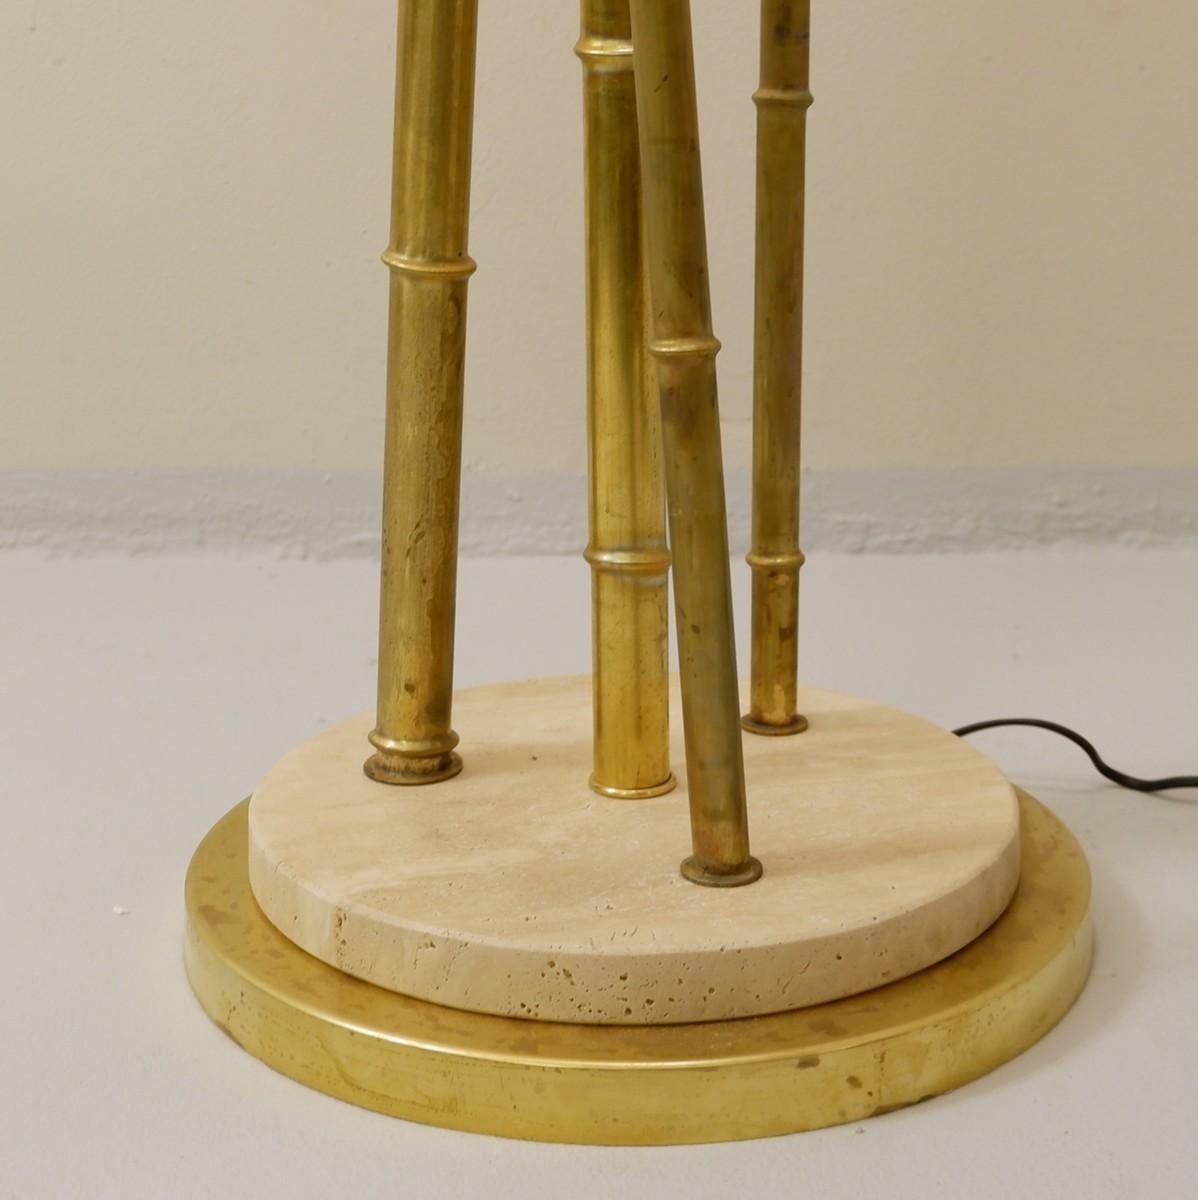 Brass bamboo floor lamp, a pair available
Price for one.